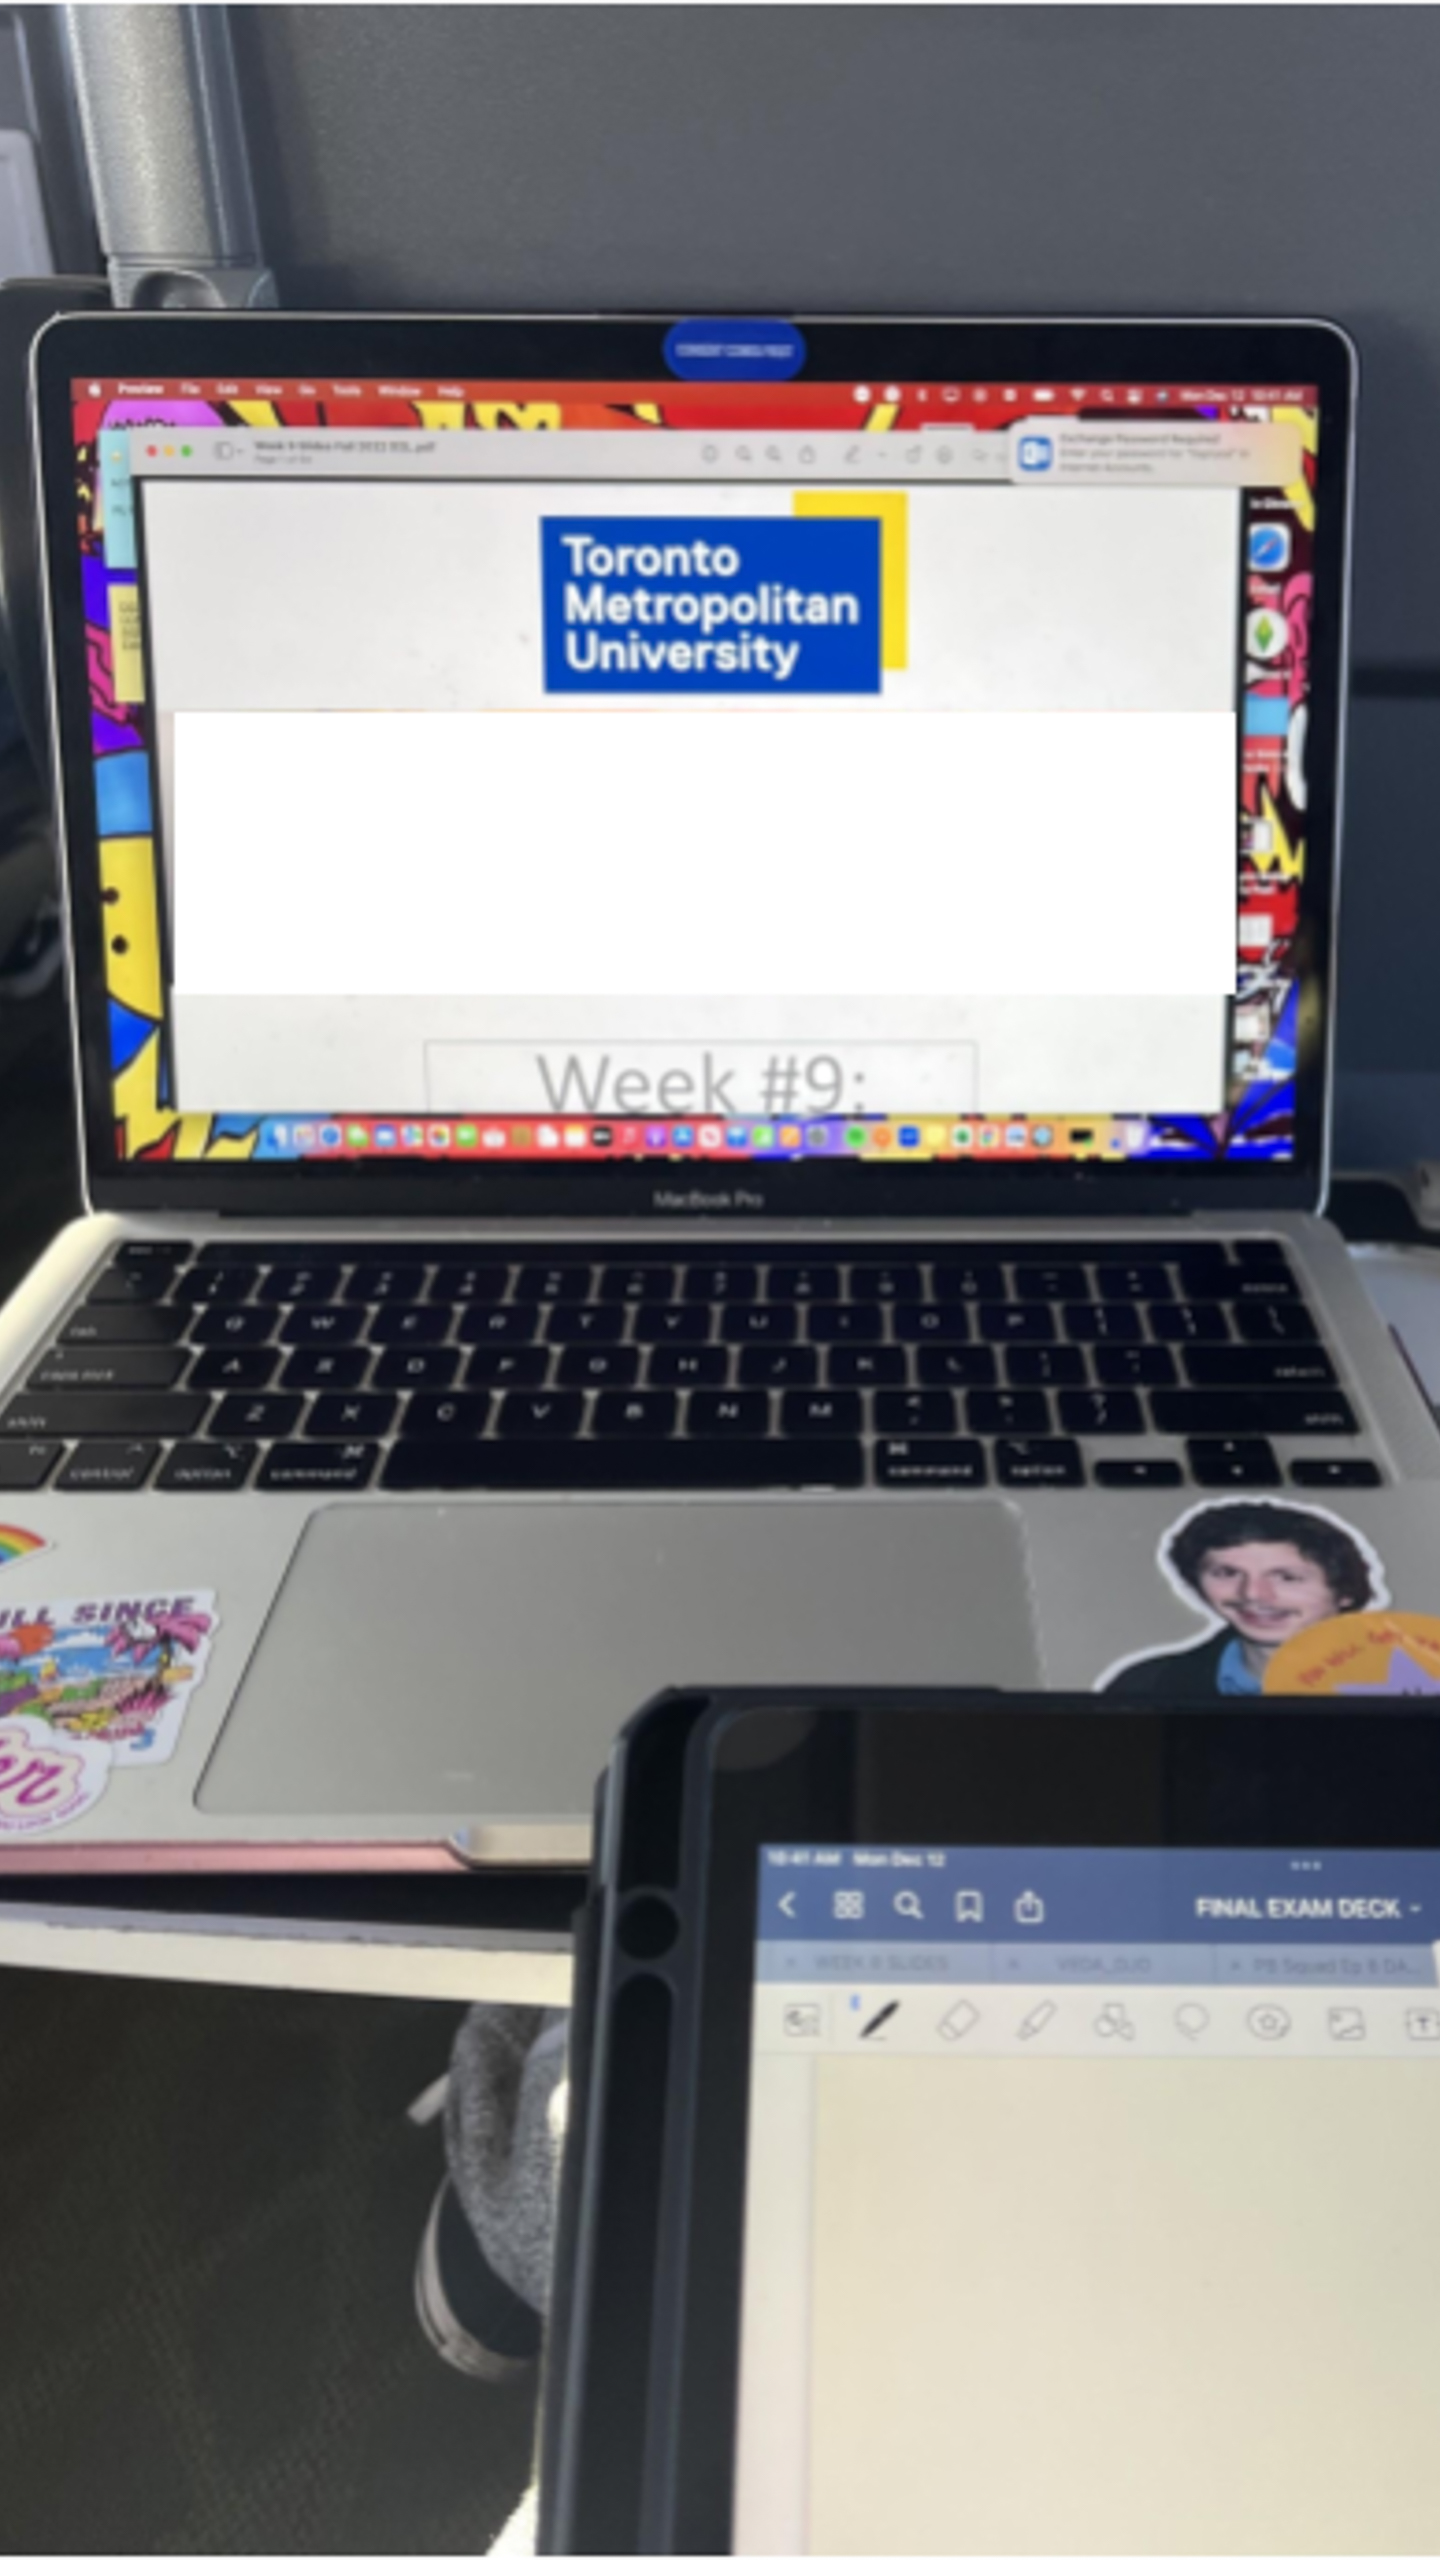 Tablet in the foreground with a laptop sitting on the table with university's website in the background